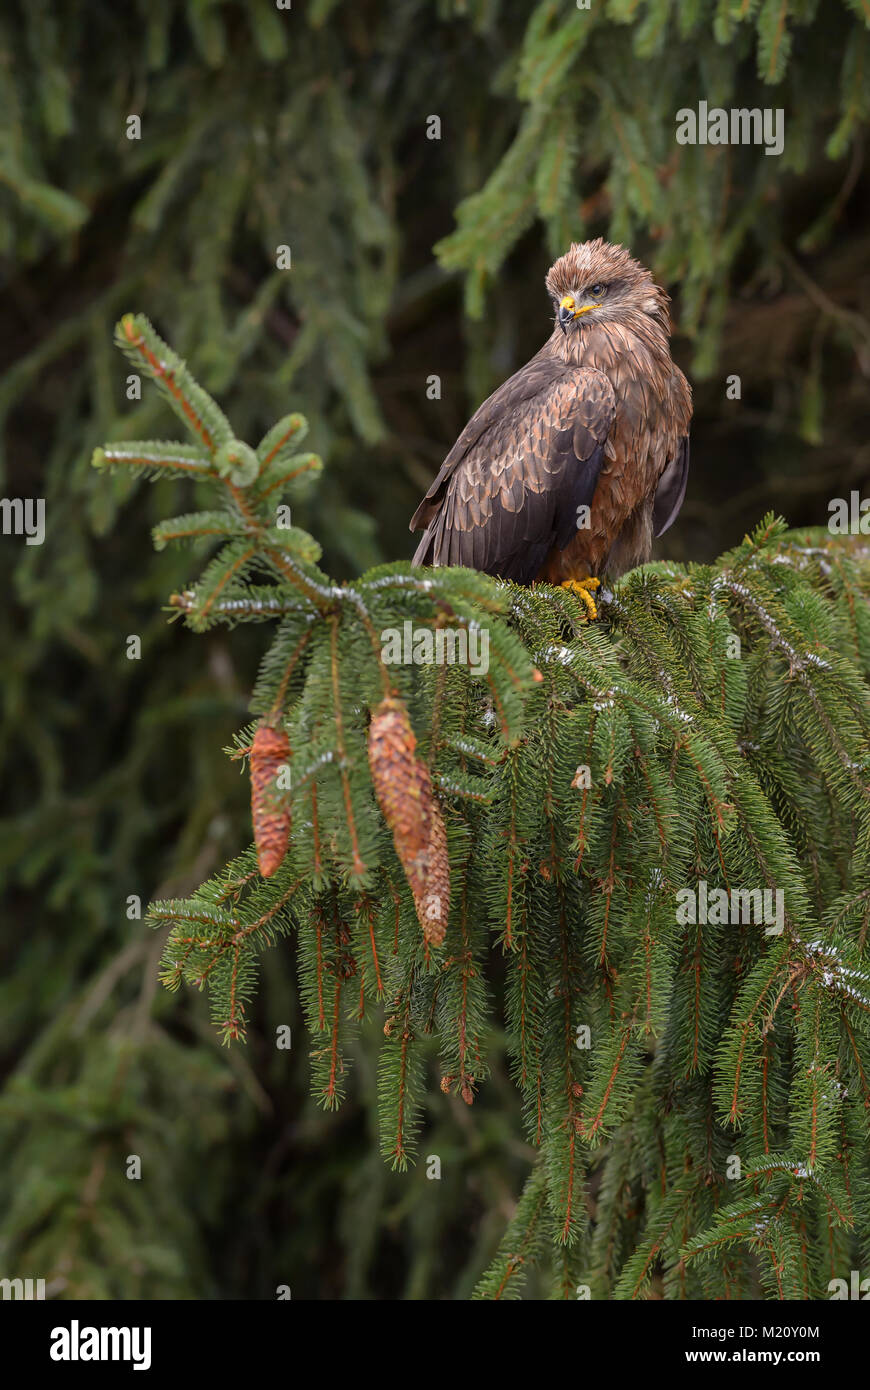 Black Kite - Milvus migrans, beautiful brown raptor from European forest. Birdwatching. Falconry. Stock Photo